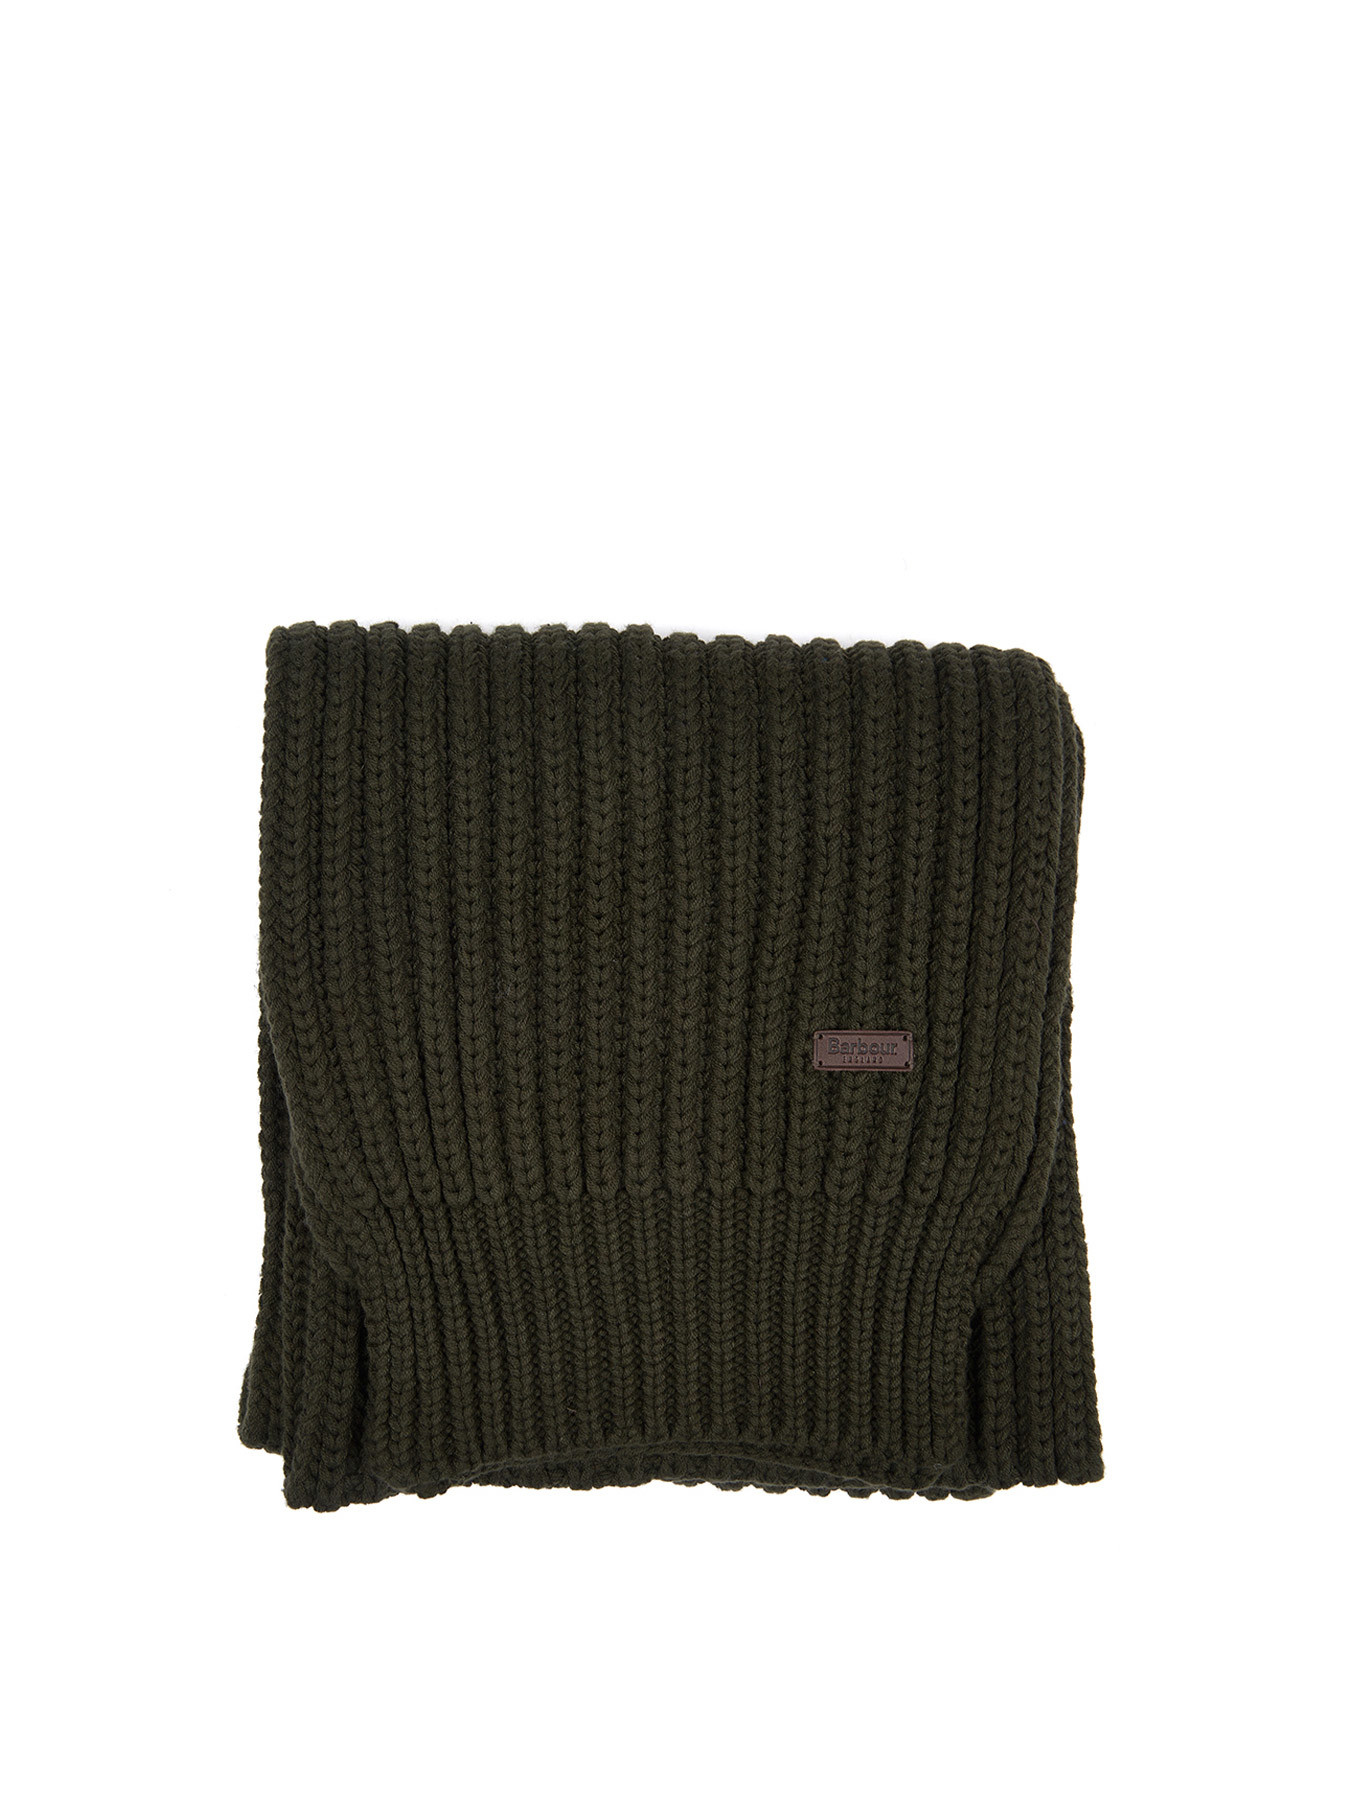 Men's Barbour Chunky Rib Knitted Giftset | Hats | Fenwick